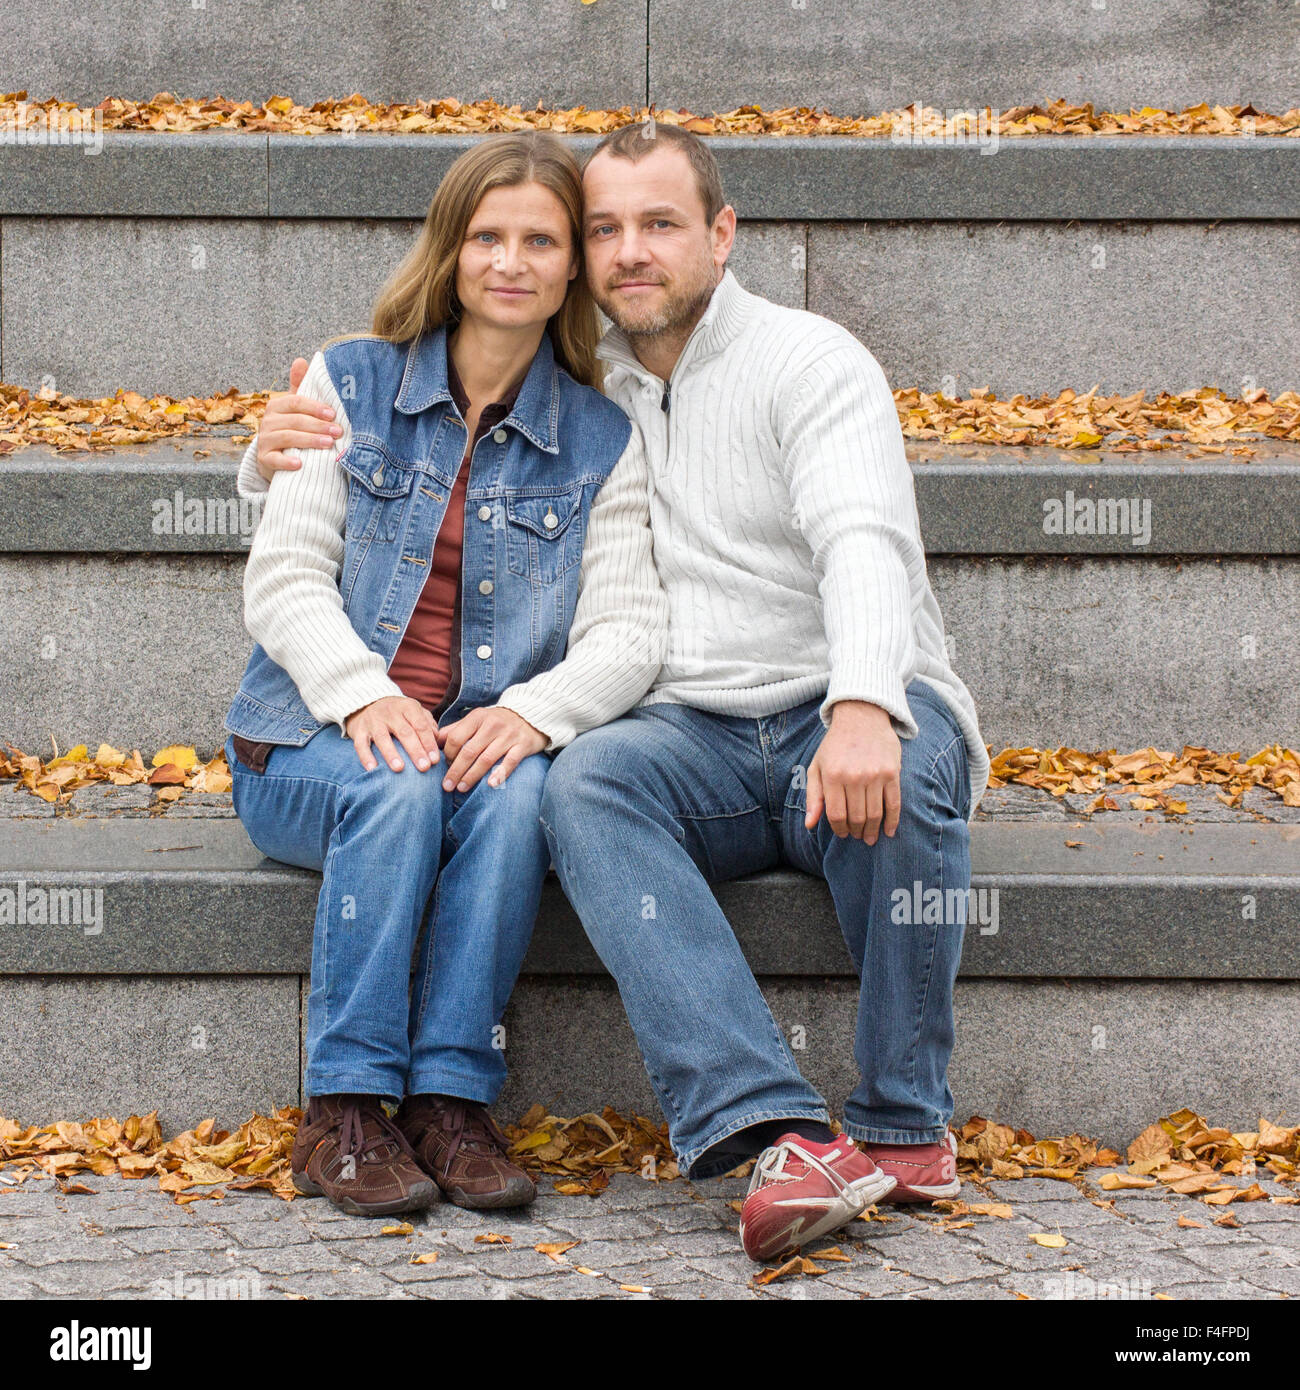 A woman and a man with long hair sitting on gray stone staircase with yellow autumn leaves Stock Photo